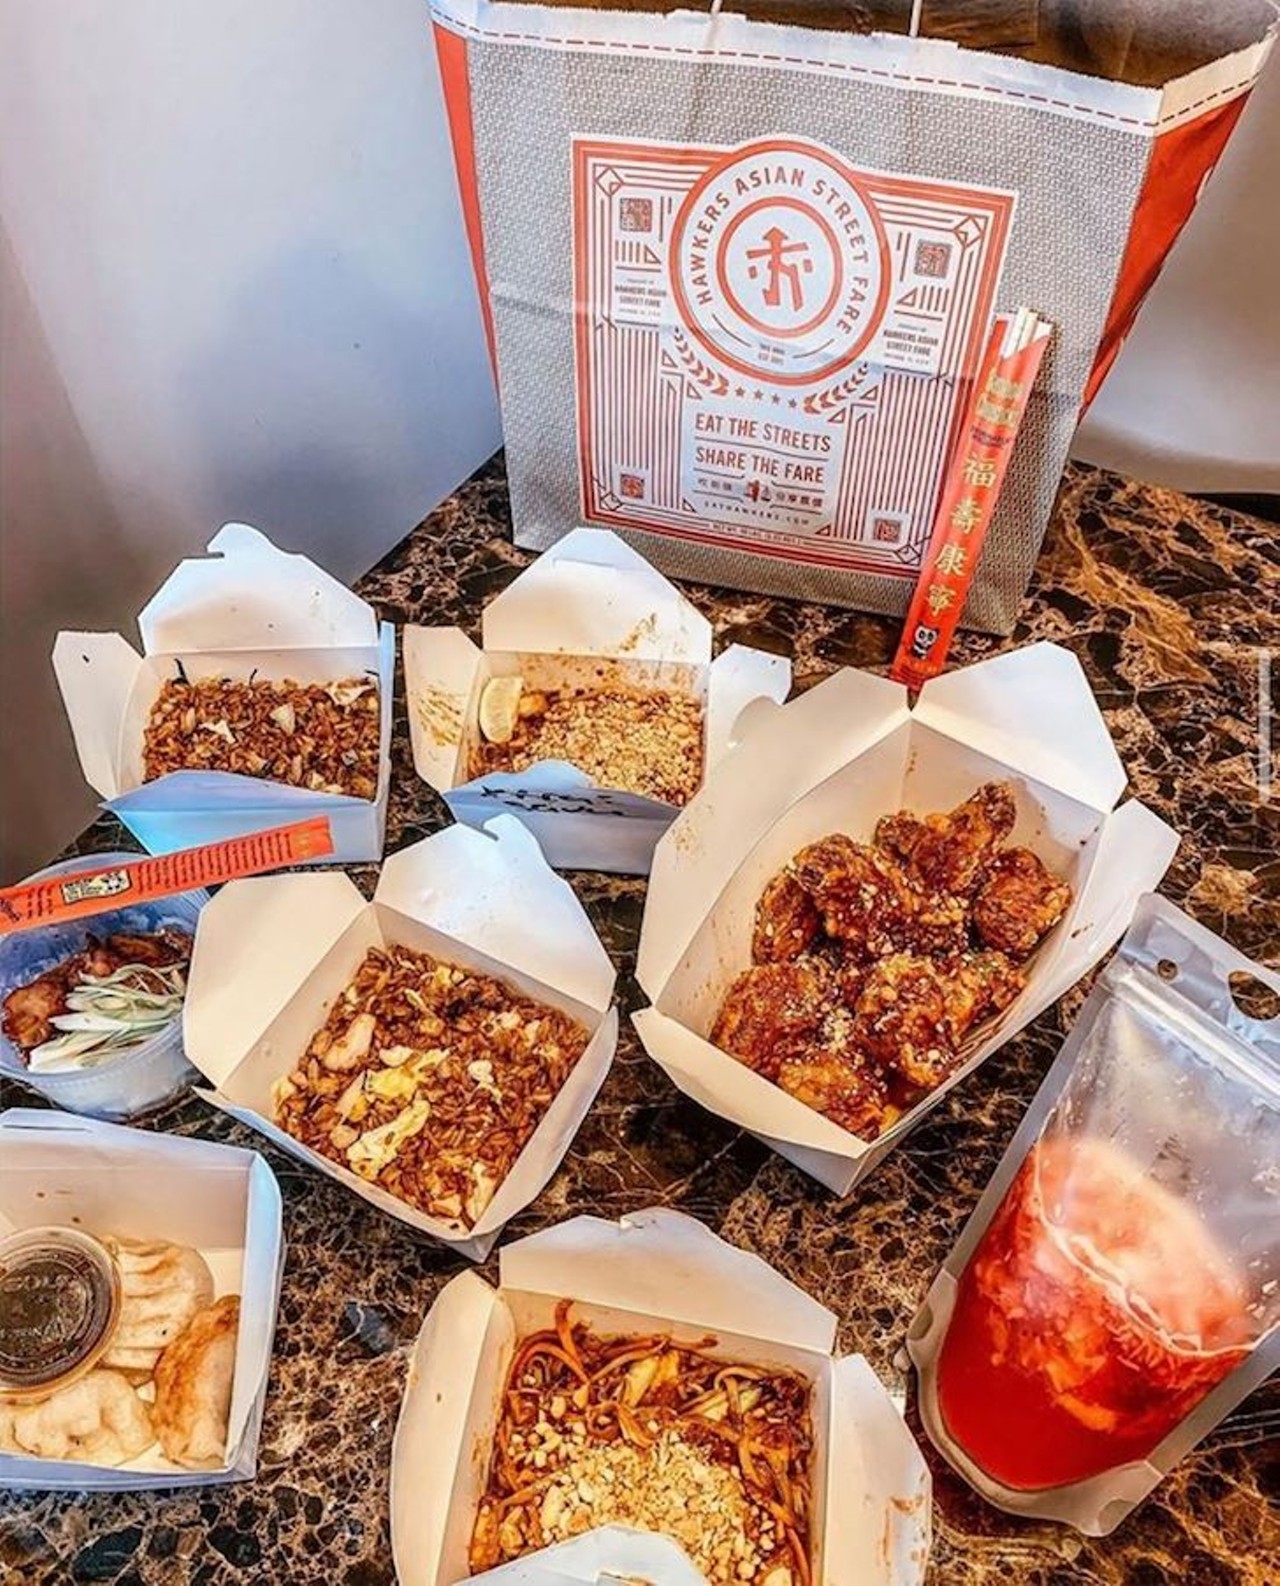 Hawkers Asian Street Fare 
1103 N. Mills Ave., 407-237-0606
Pre-order online by Thursday evening, May 7 to score a Hawker&#146;s Mother&#146;s Day meal to-go. Serves four and curry mashed potatoes are back for this weekend. 
Photo via Hawkers Asian Street Fare/Facebook